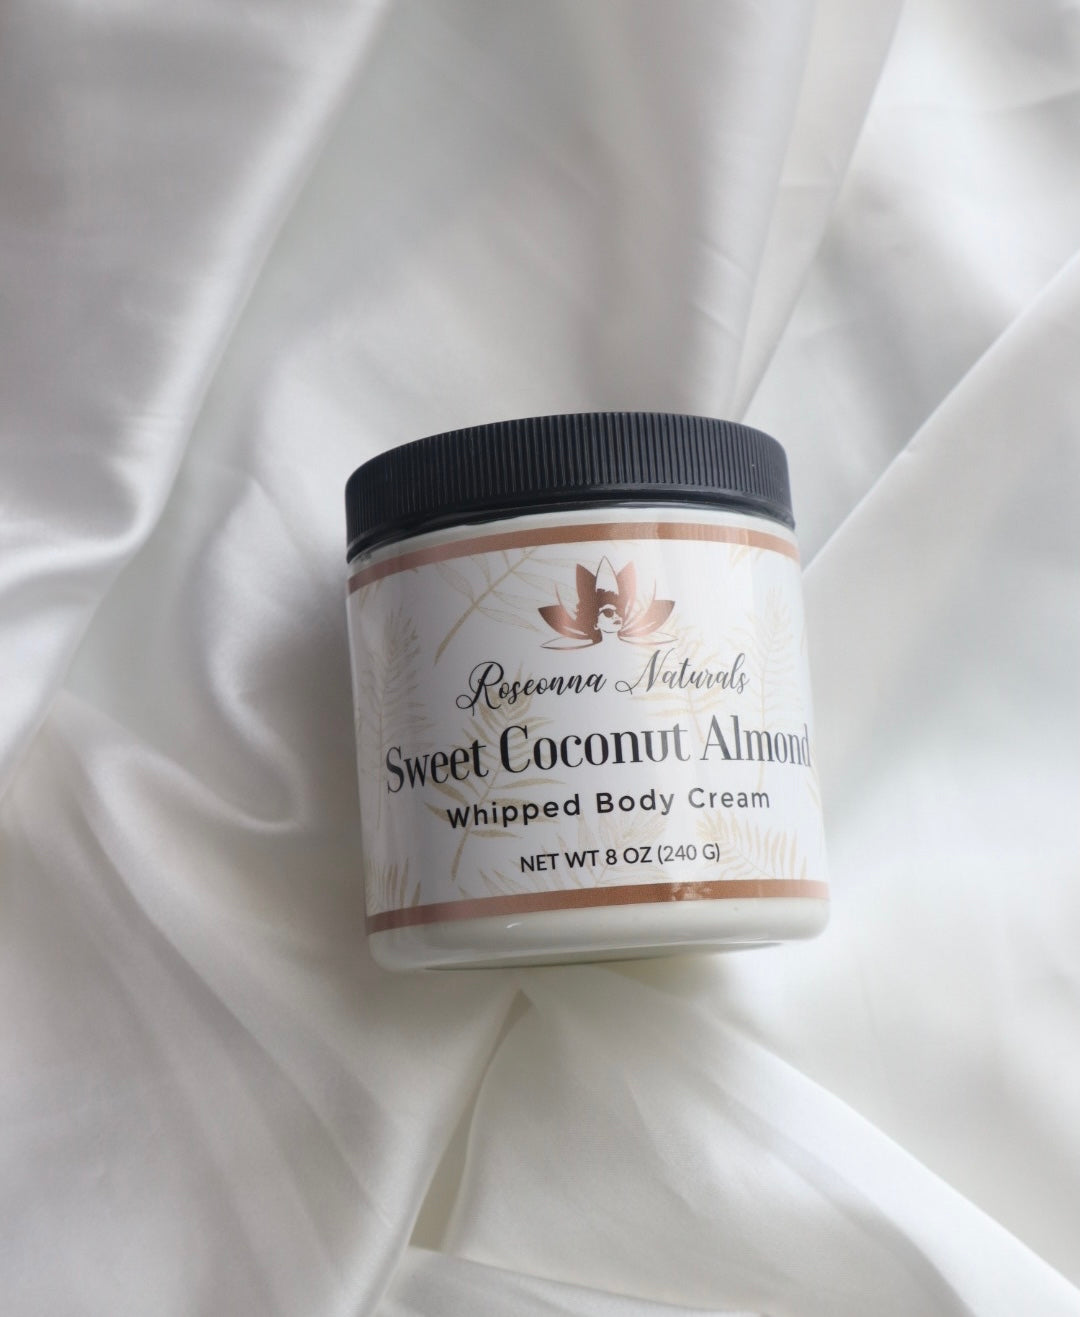 Sweet Coconut Almond Whipped Body Cream